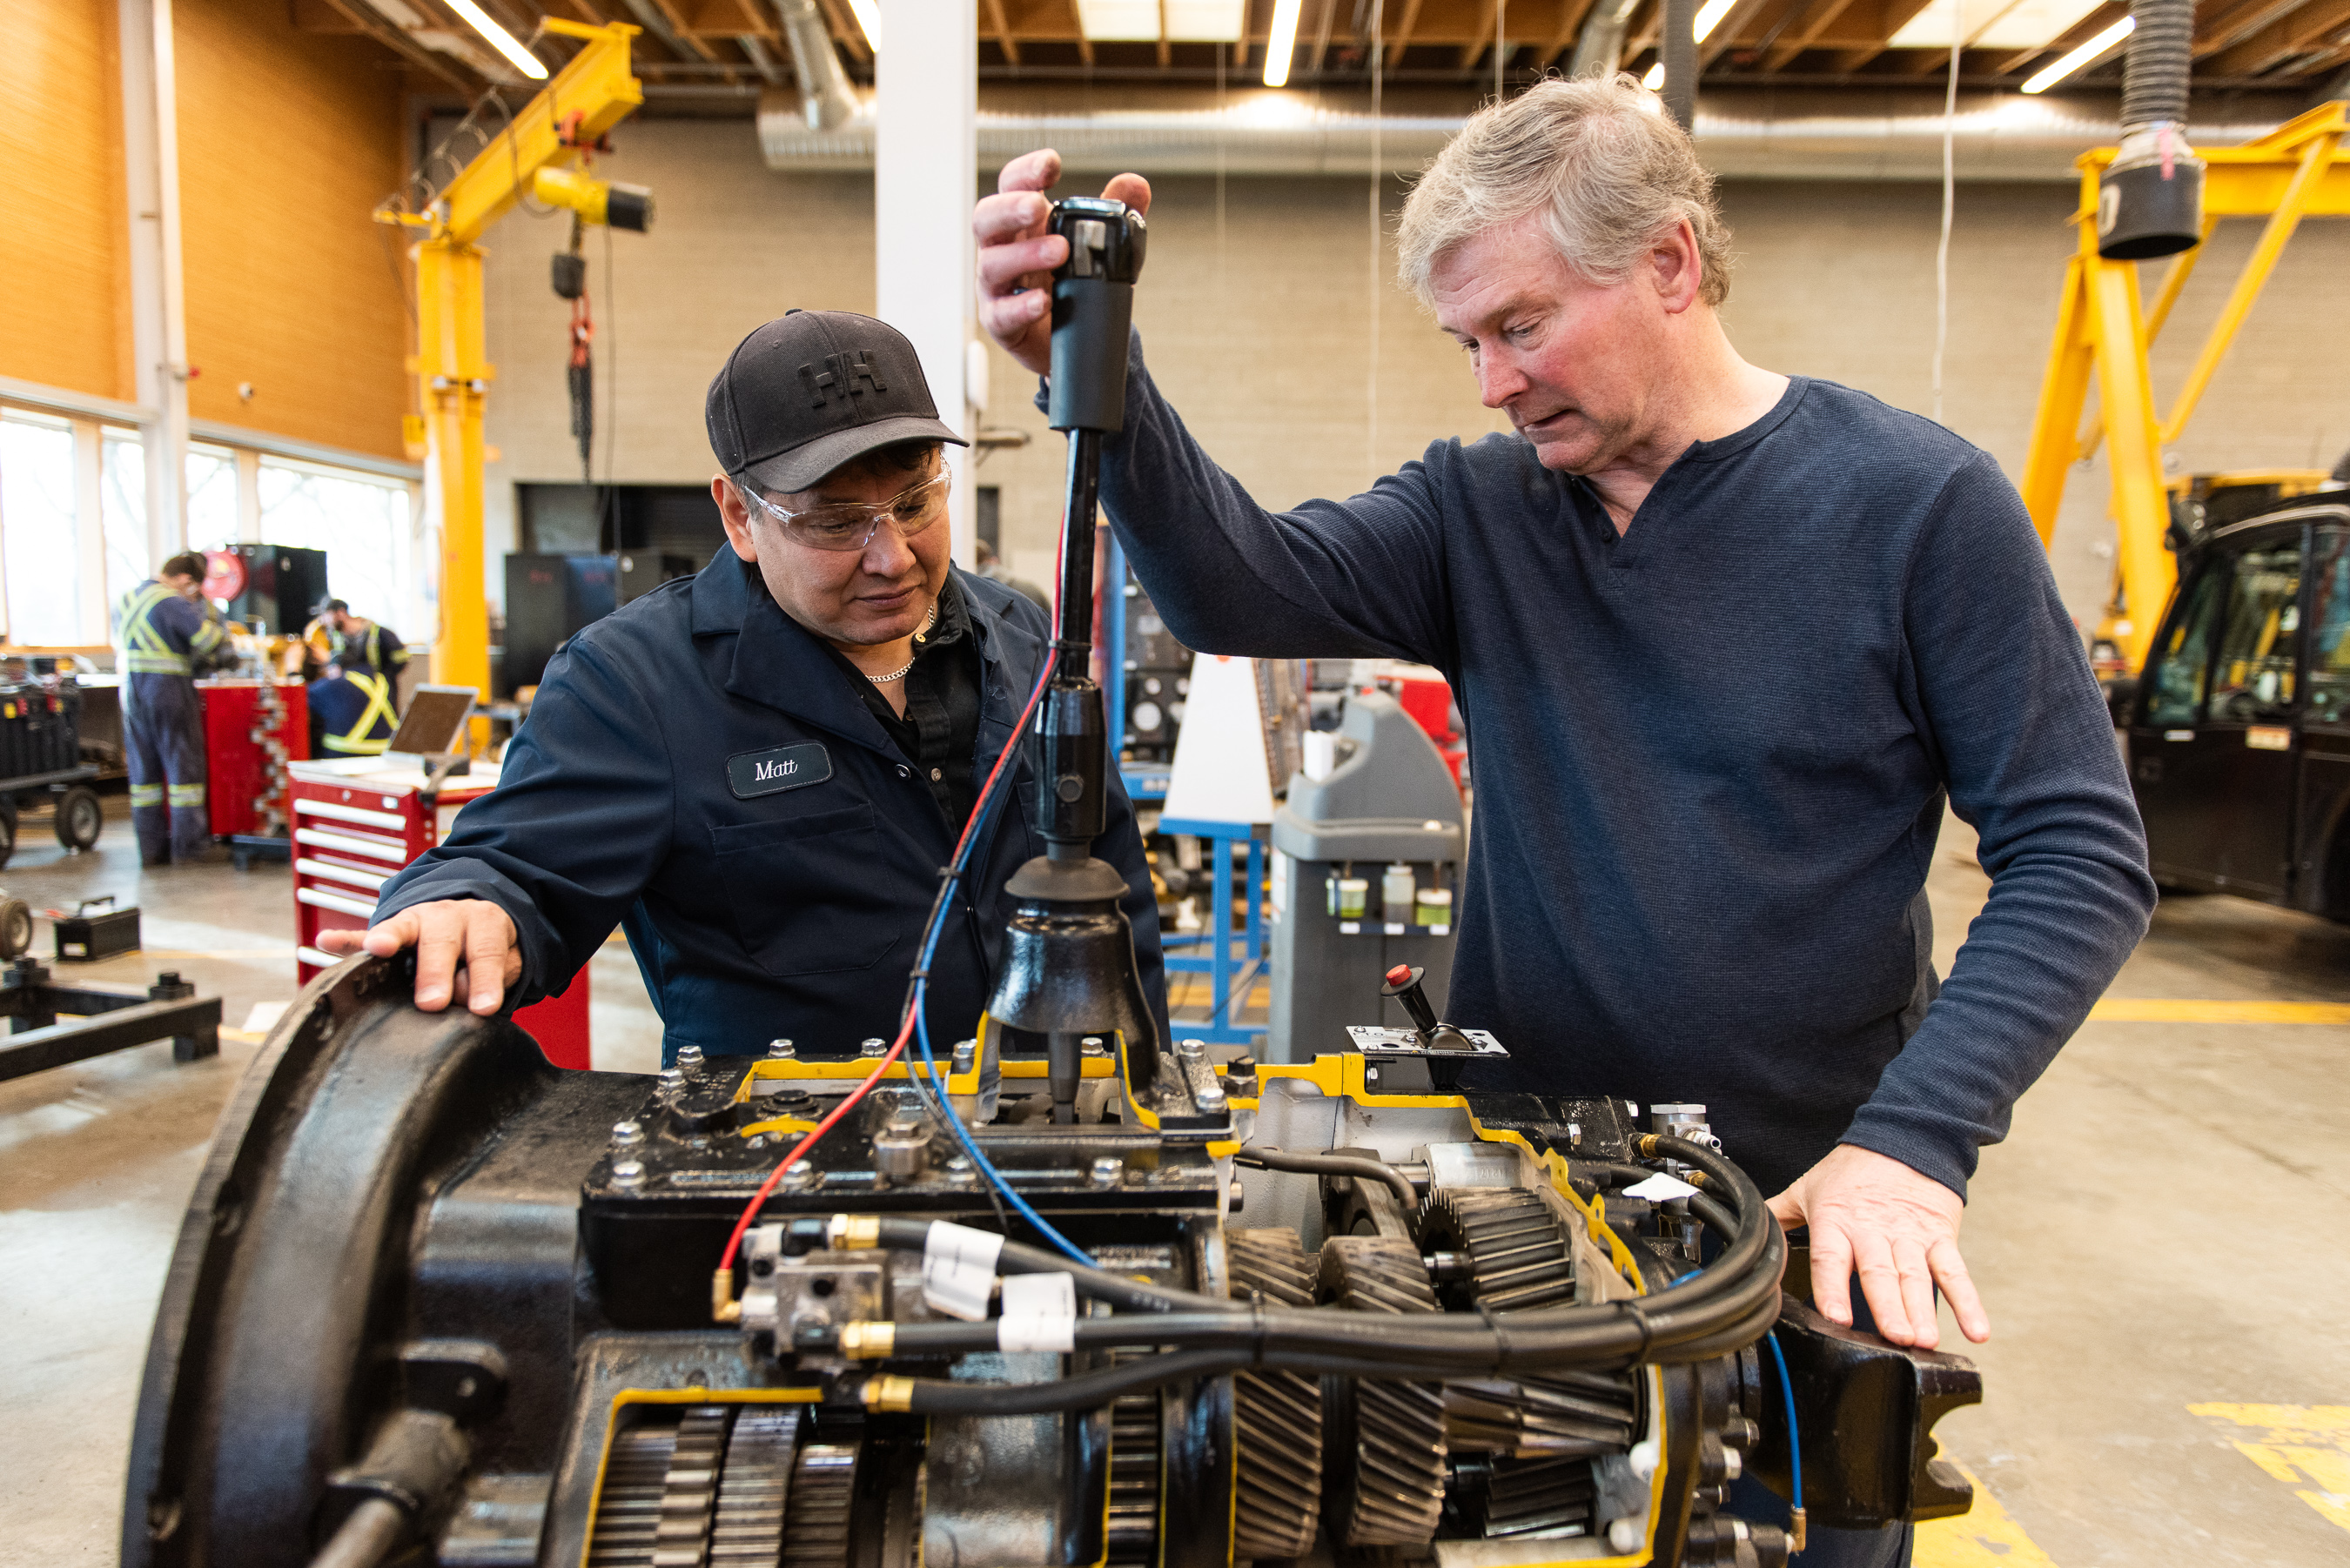 Student and instructor working on a transmission